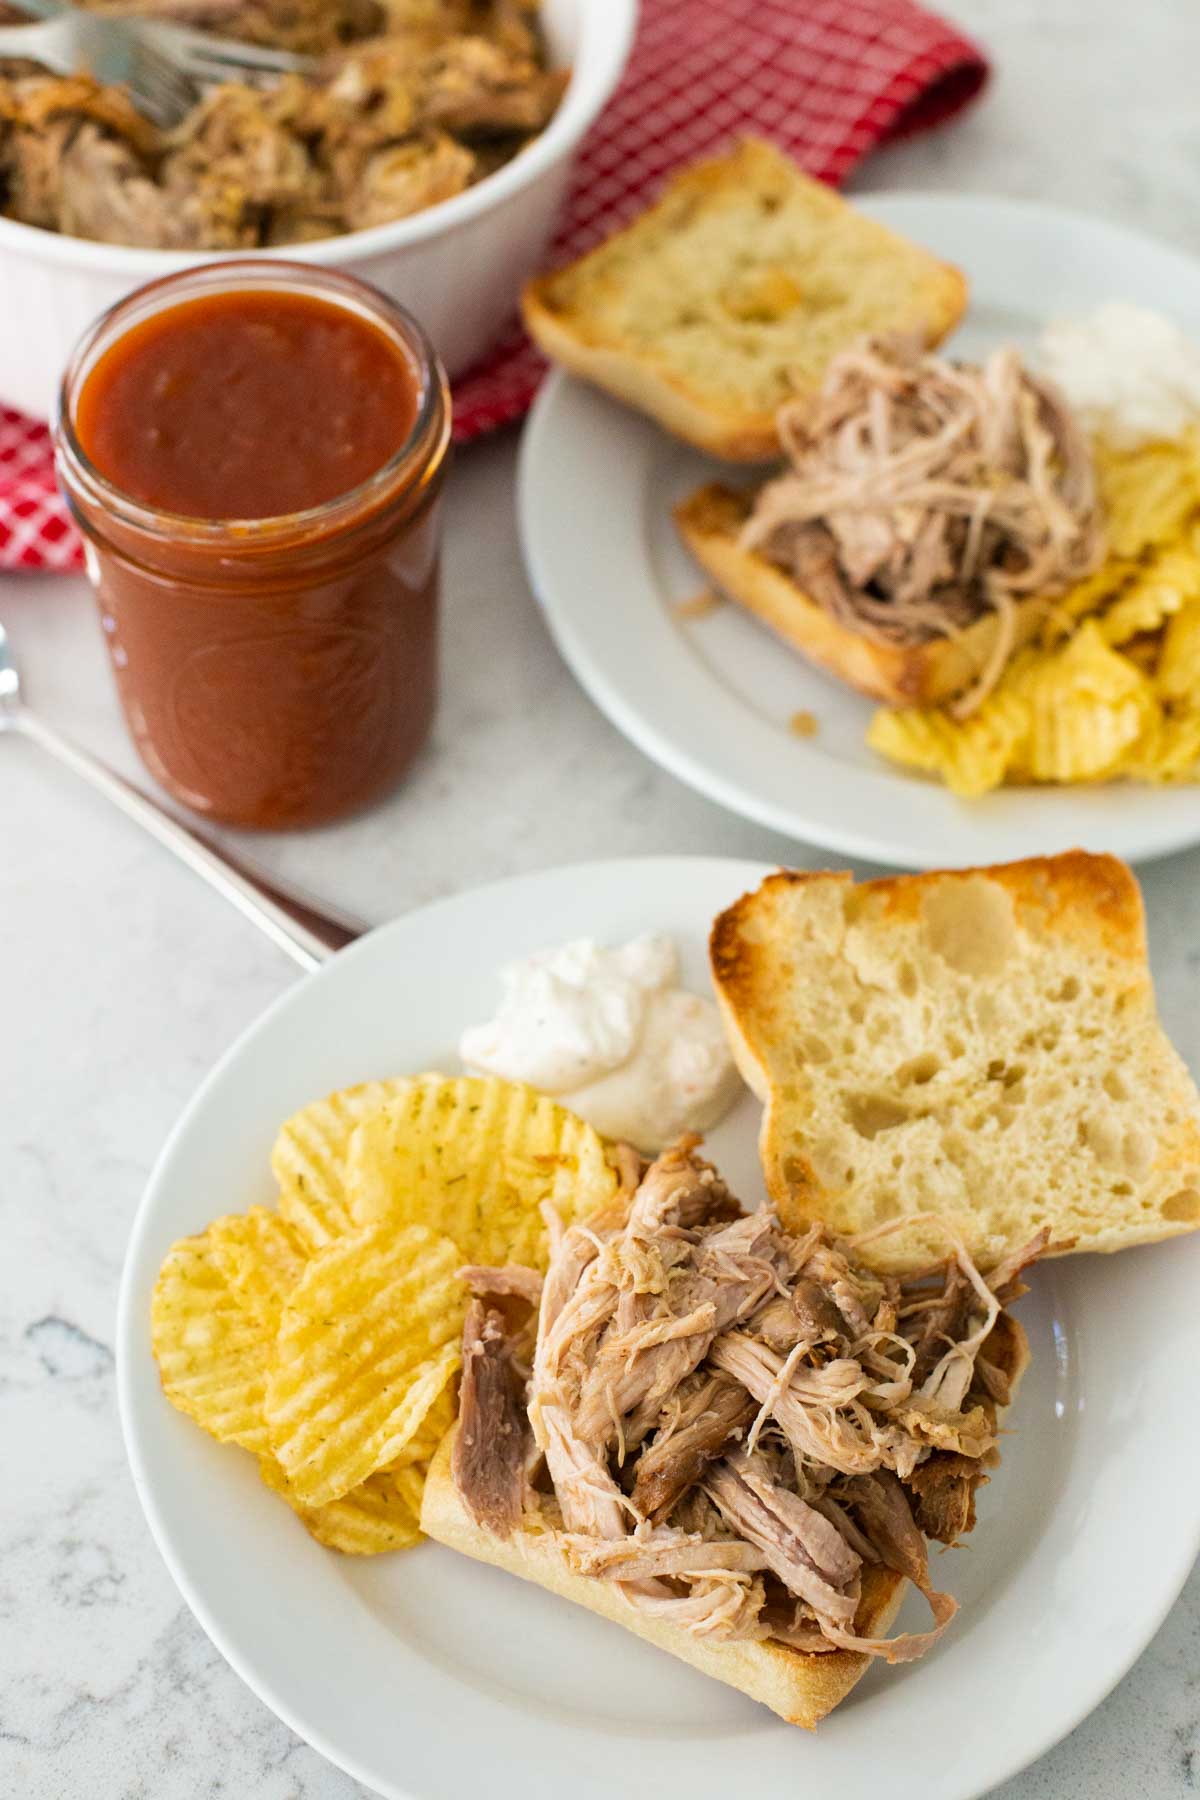 The pulled pork has been served on toasted ciabatta rolls with potato chips on the side.